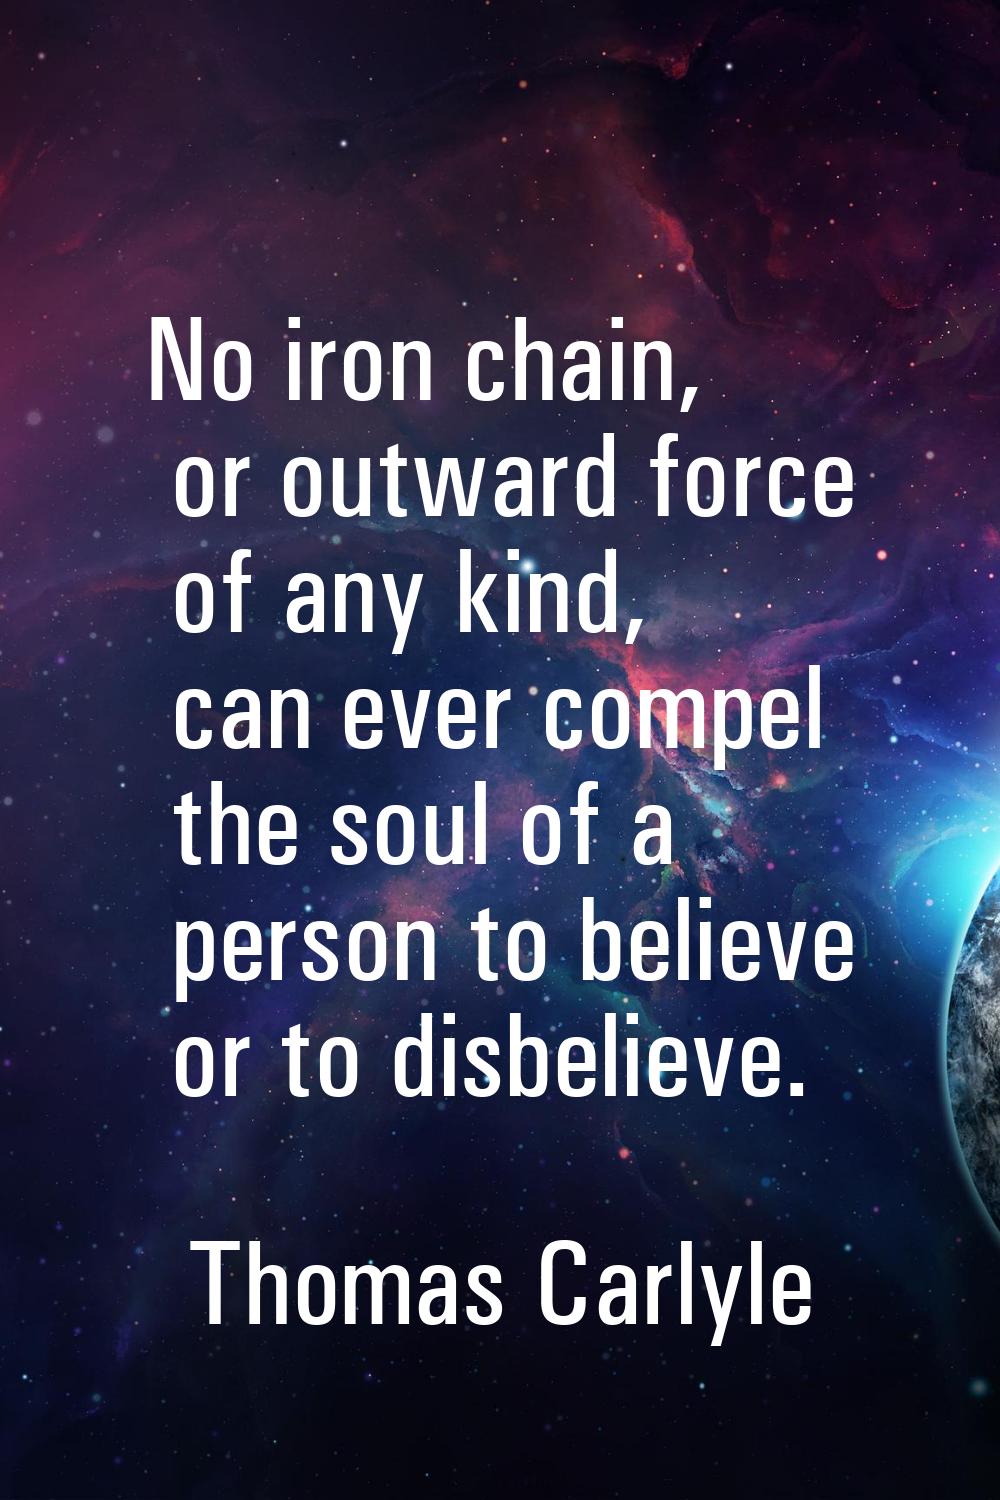 No iron chain, or outward force of any kind, can ever compel the soul of a person to believe or to 